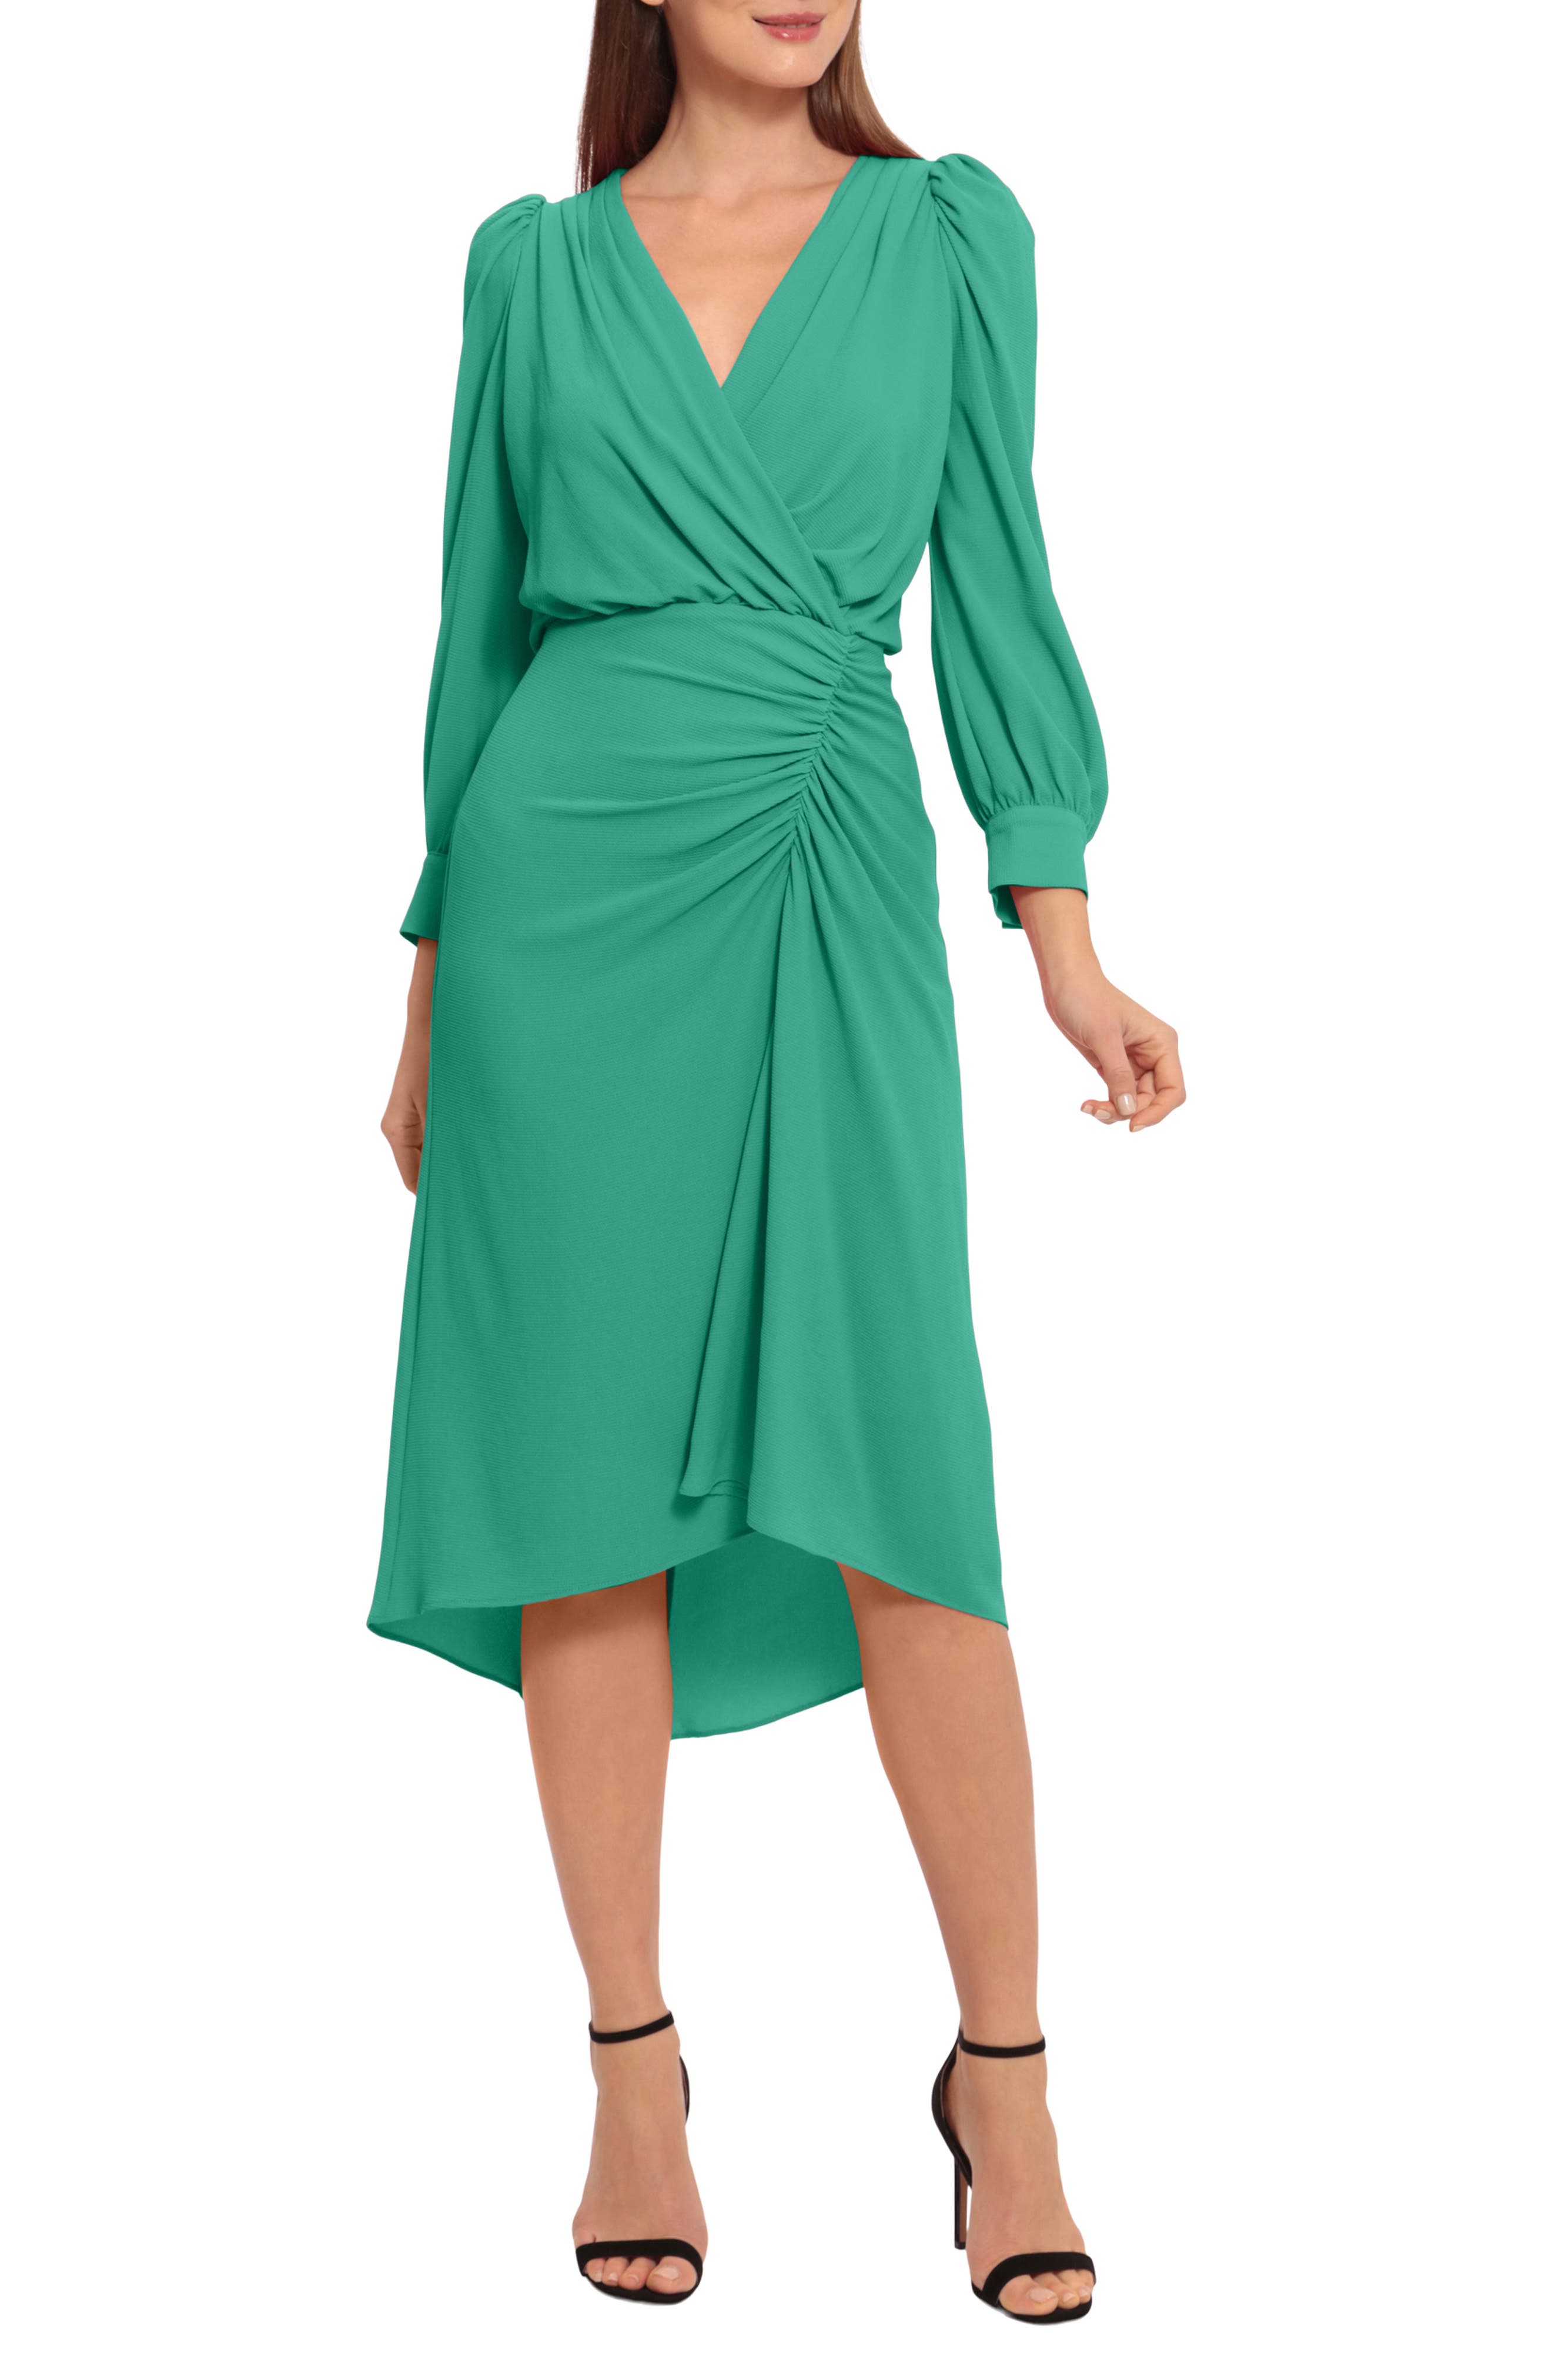 Indian Summers Inspired Clothing Maggy London Ruched Long Sleeve High-Low Midi Dress in Golf Green at Nordstrom Rack Size 16 $79.97 AT vintagedancer.com